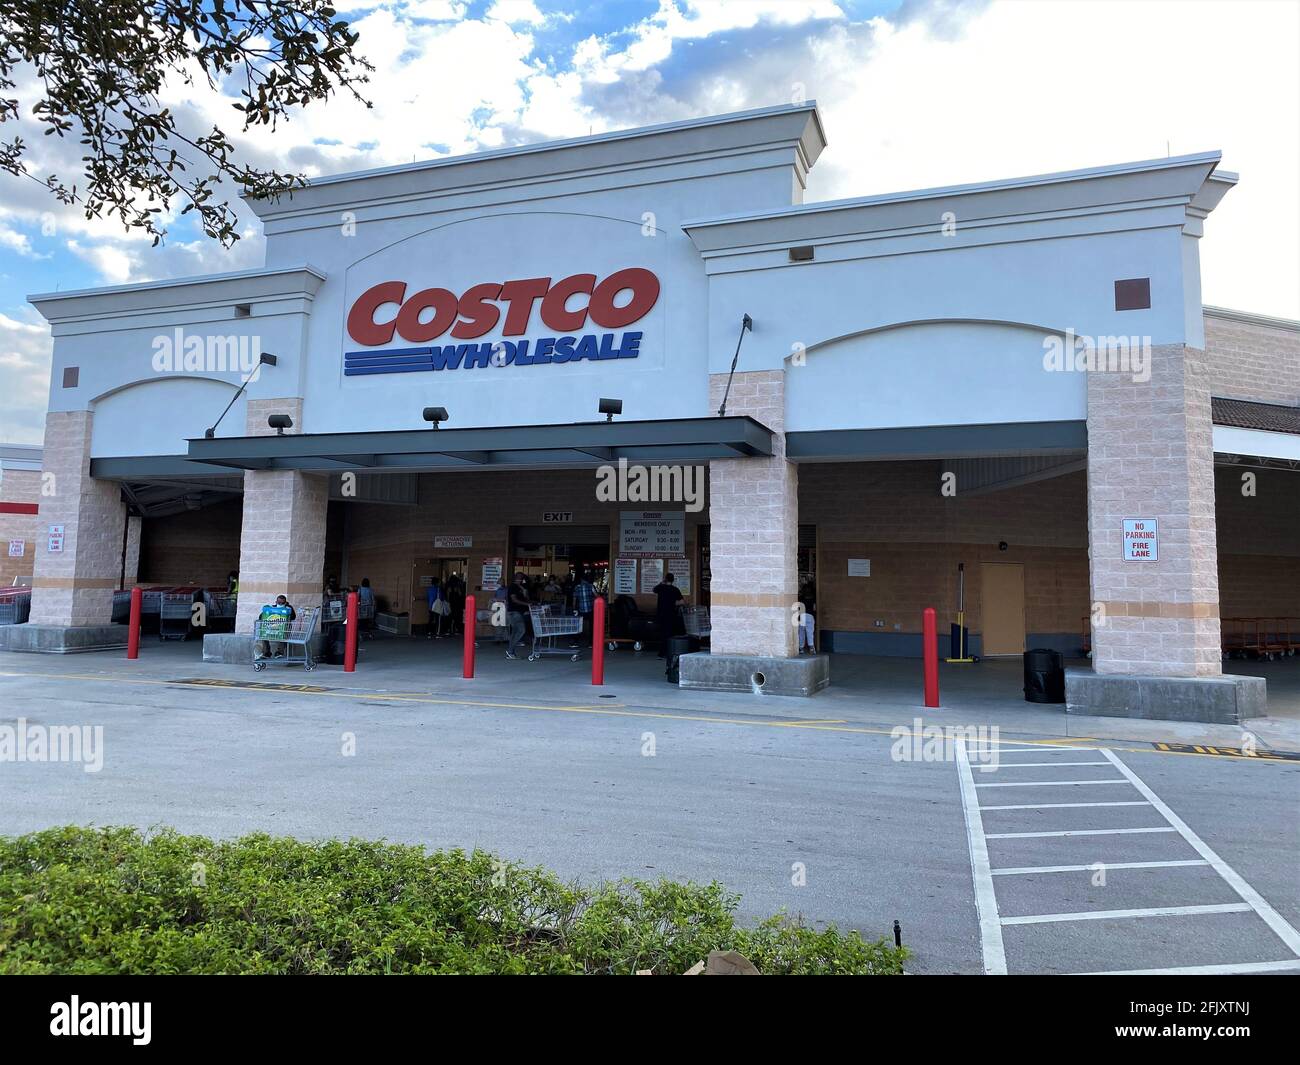 Costco Wholesale warehouse center.  Costco Warehouse store providing warehouse prices on name brands for membership based customers. Stock Photo